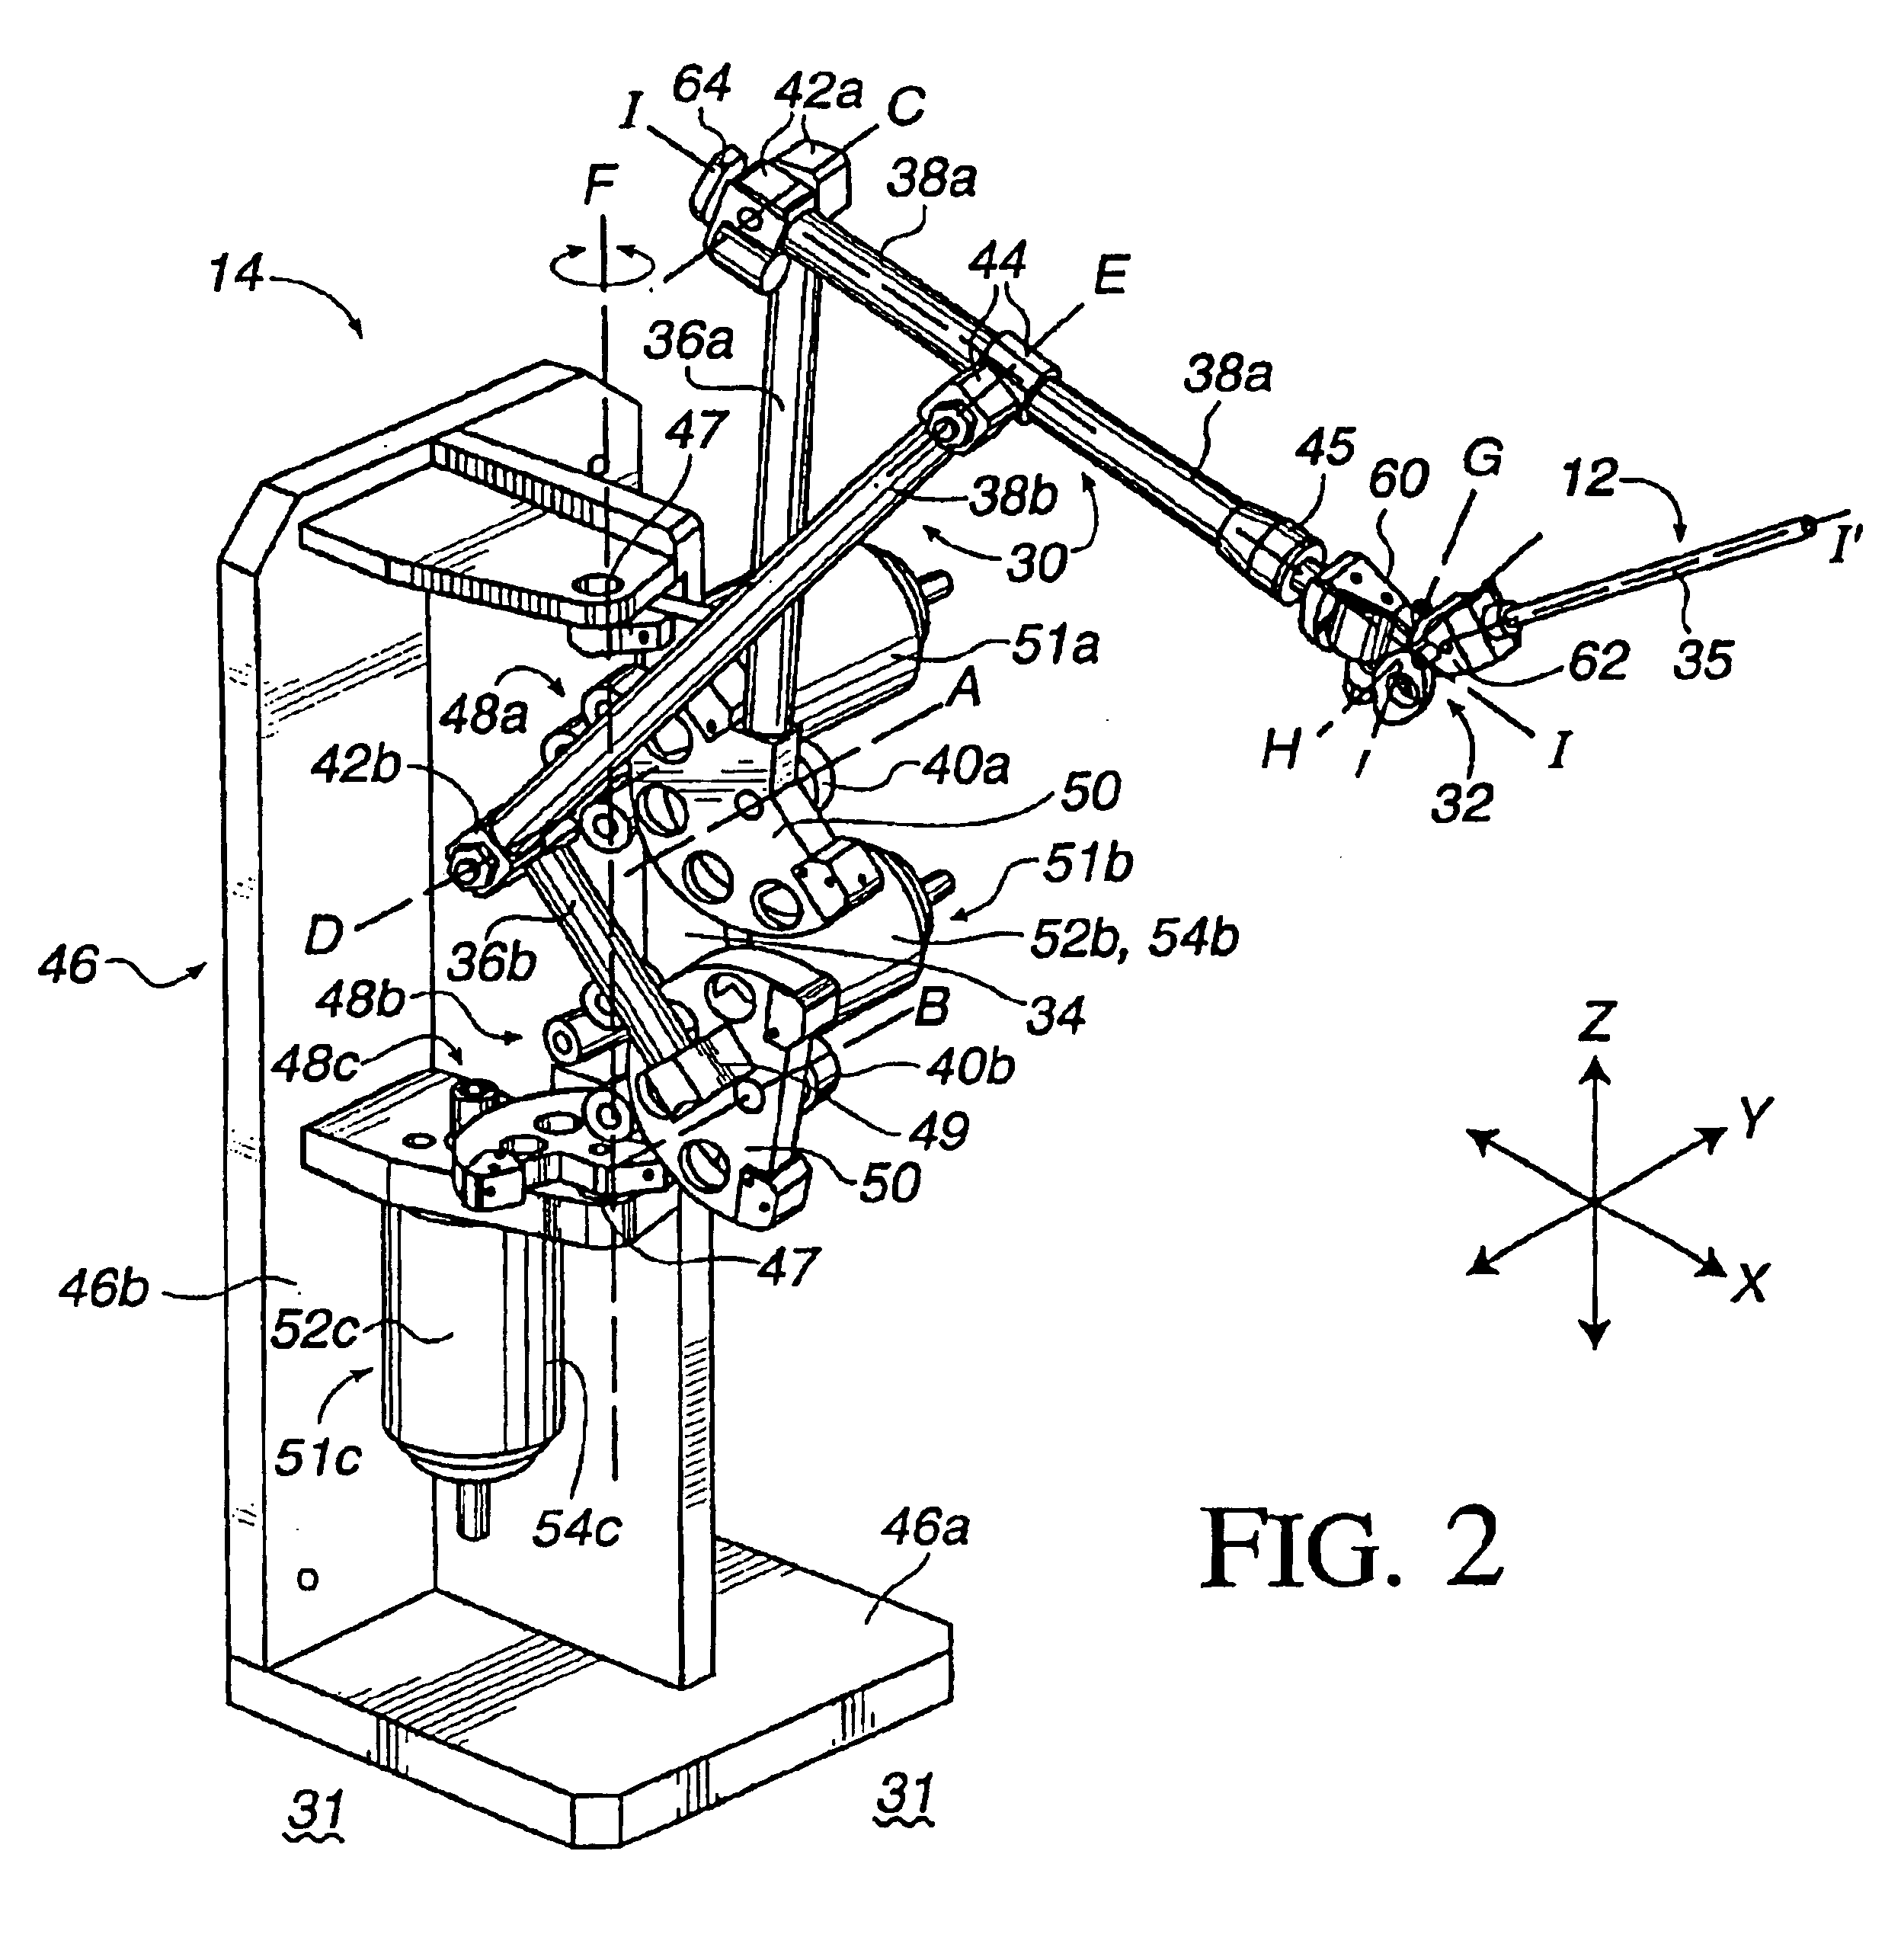 Method and apparatus for providing force feedback using multiple grounded actuators